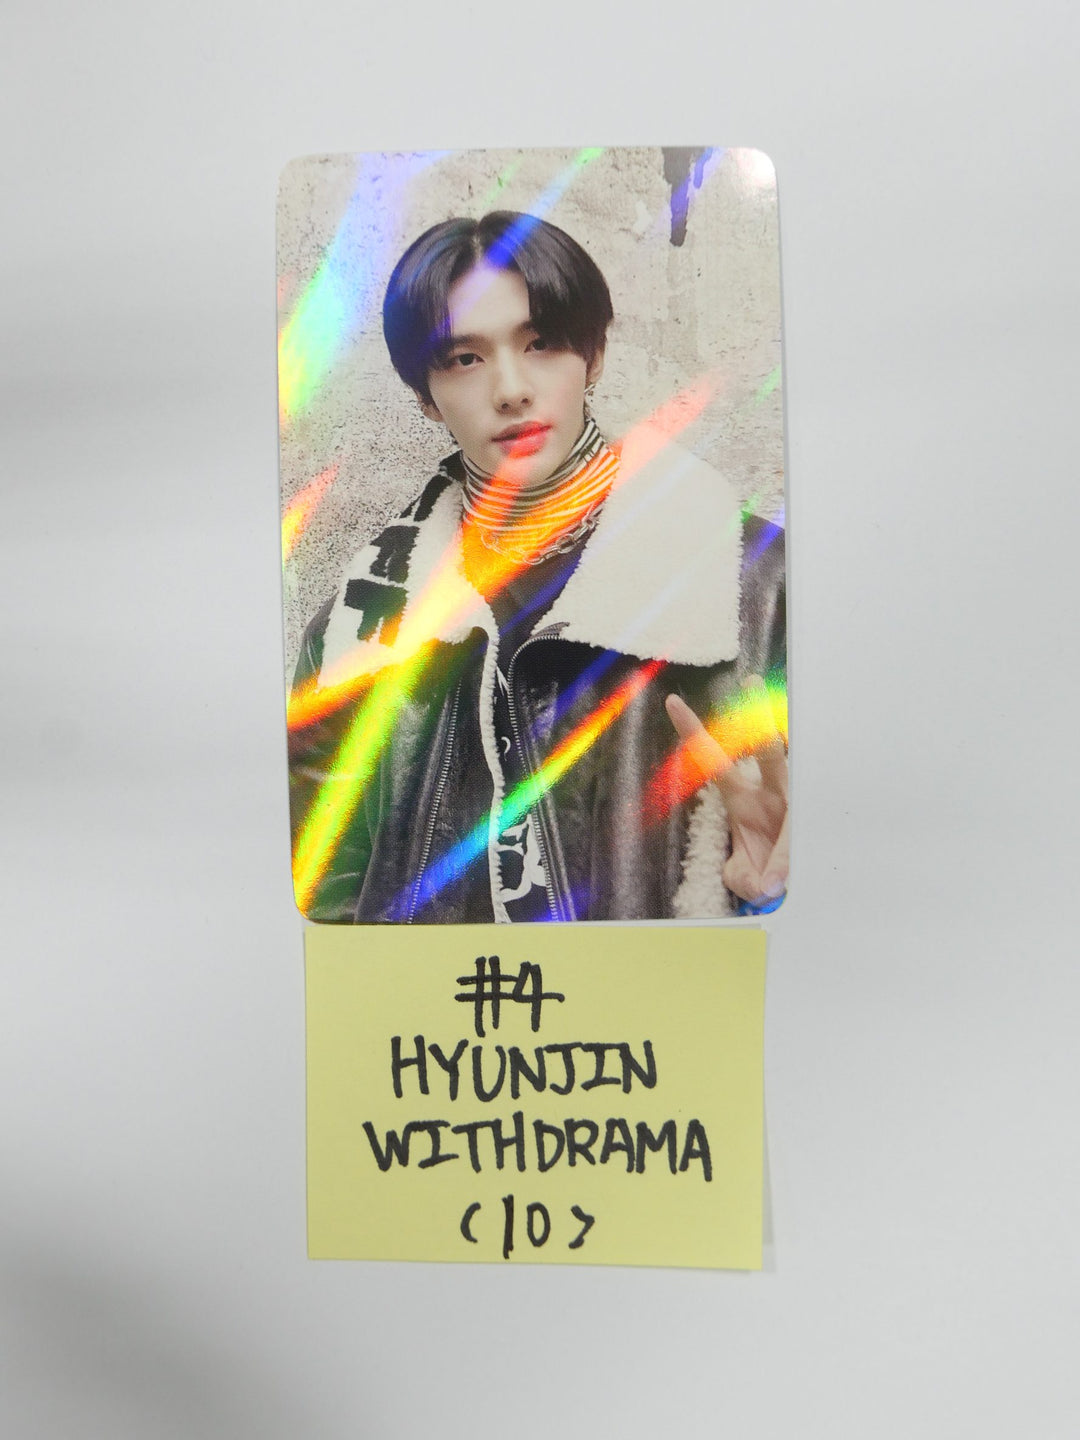 Stray Kids 'Christmas EveL' Holiday Special Single - Withdrama Pre-Order Benefit Hologram Photocard